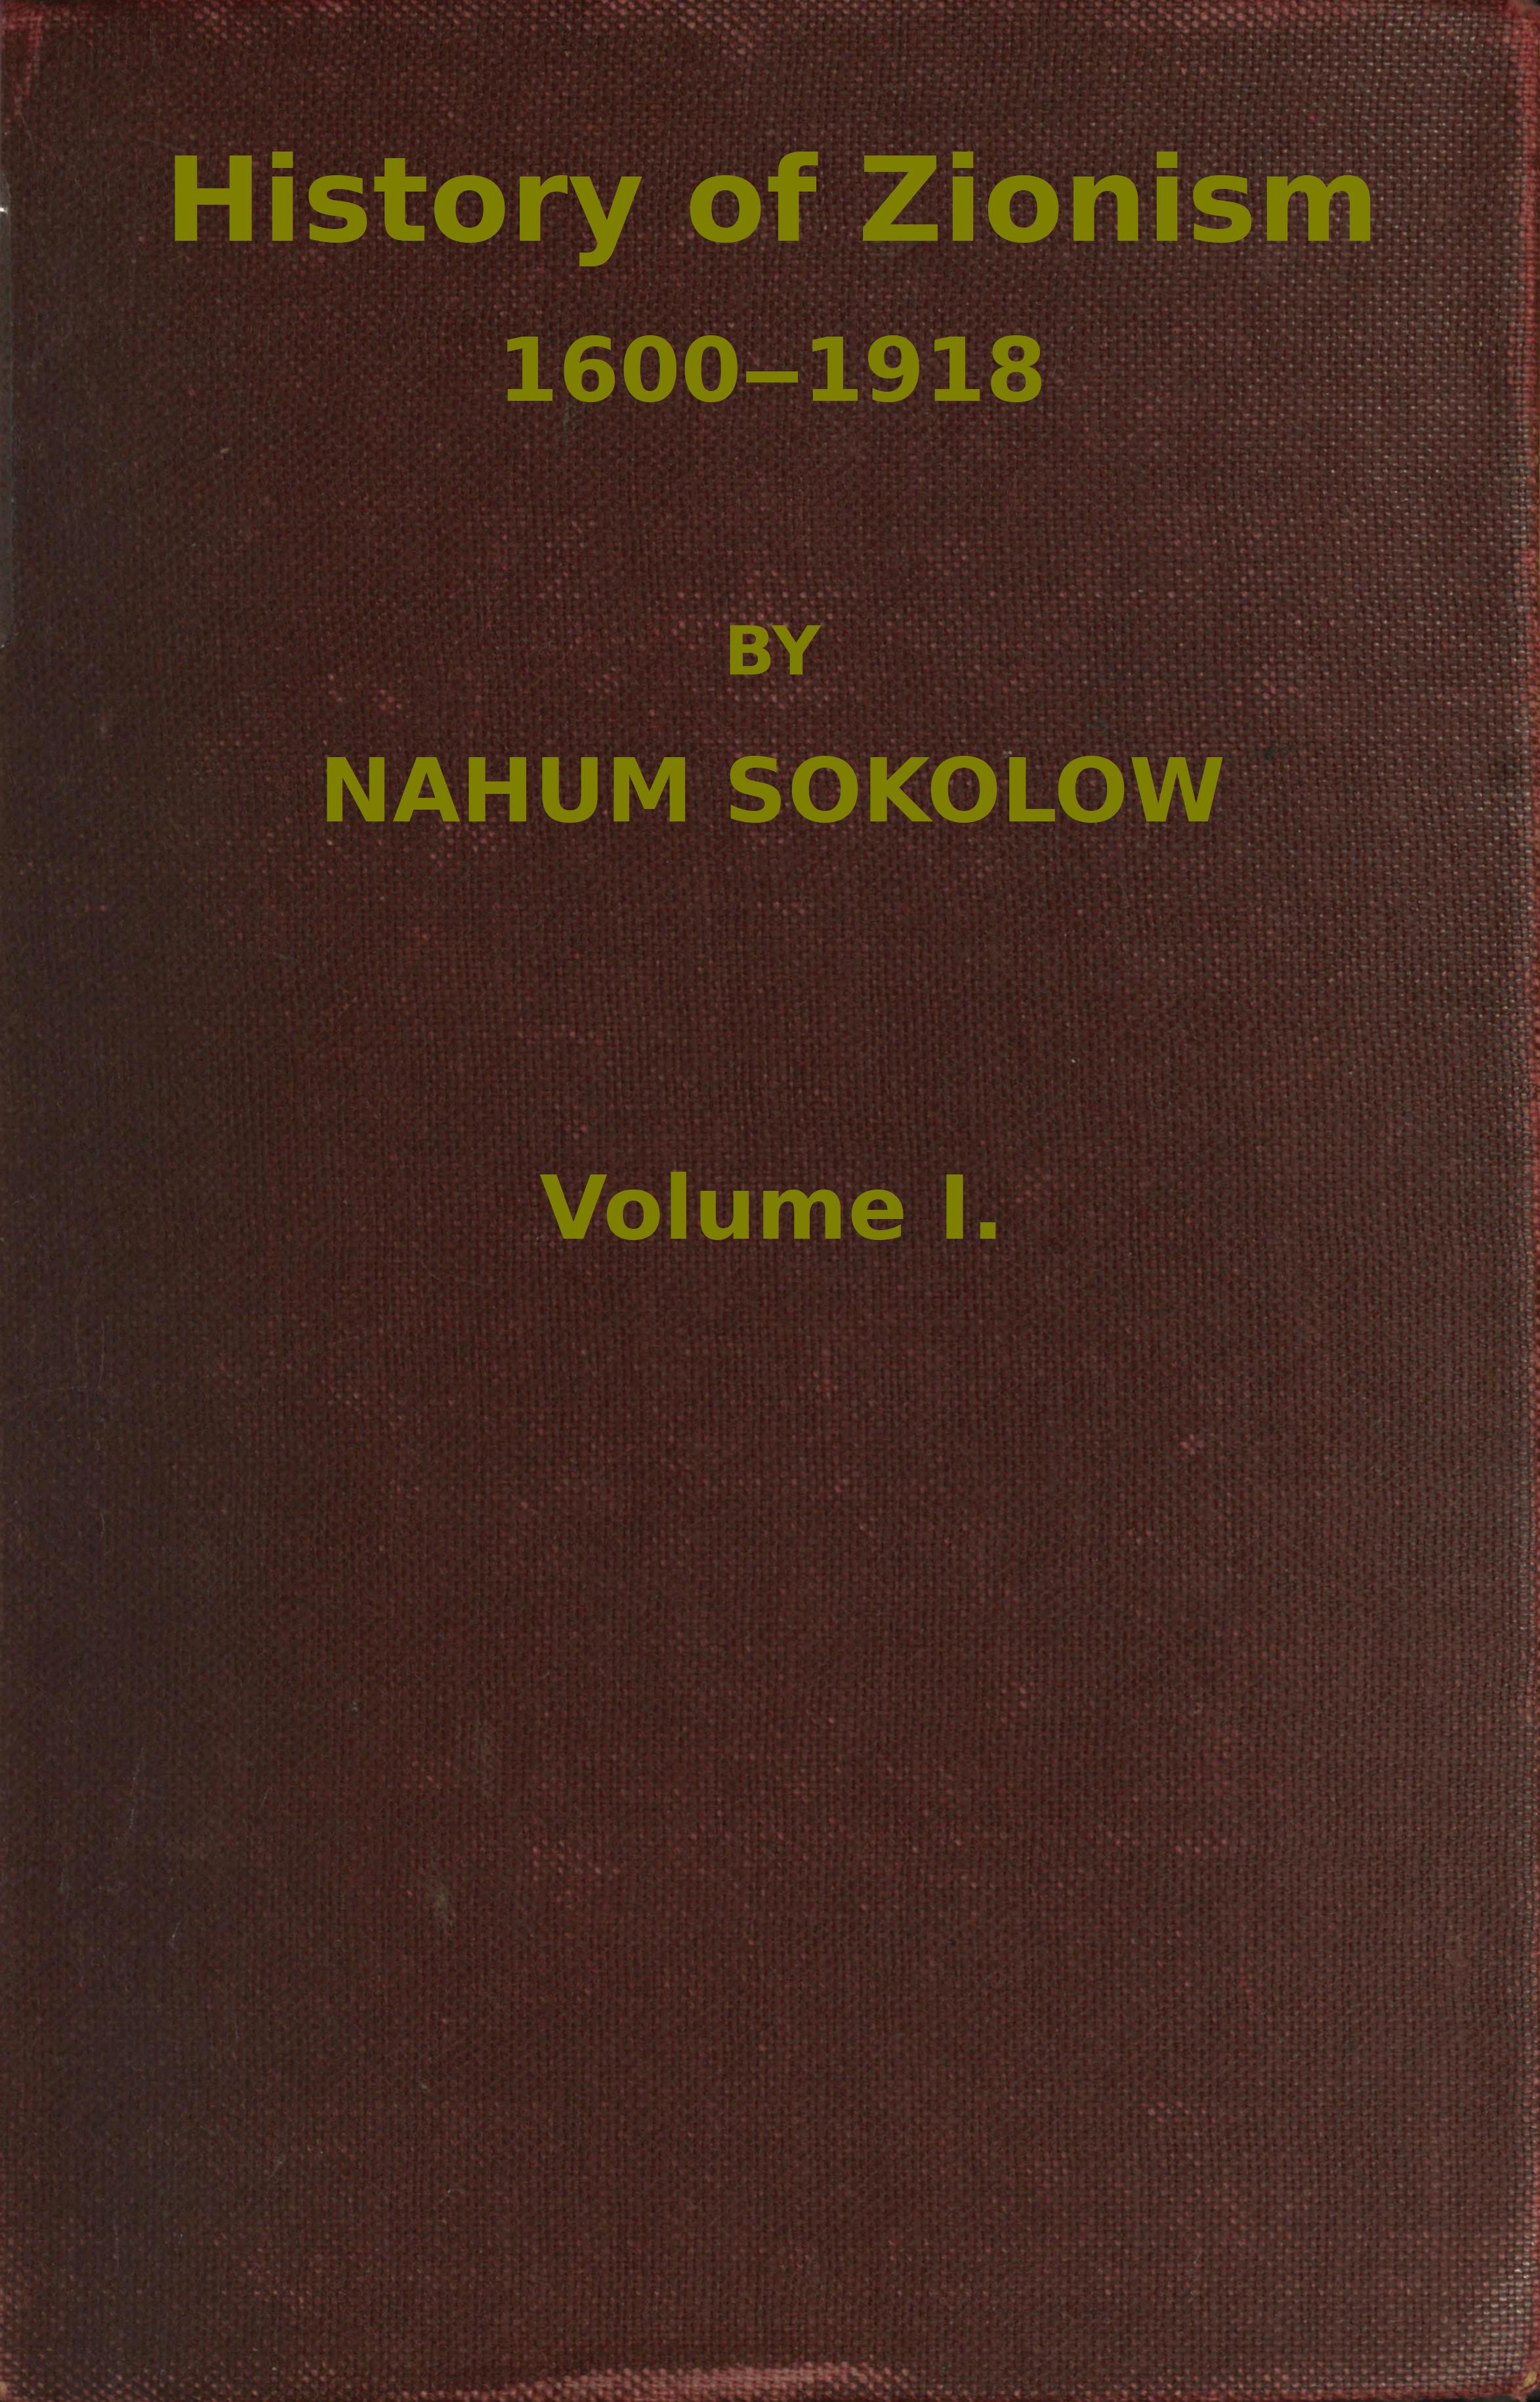 History of Zionism, by Nahum Sokolow | A Project Gutenberg eBook